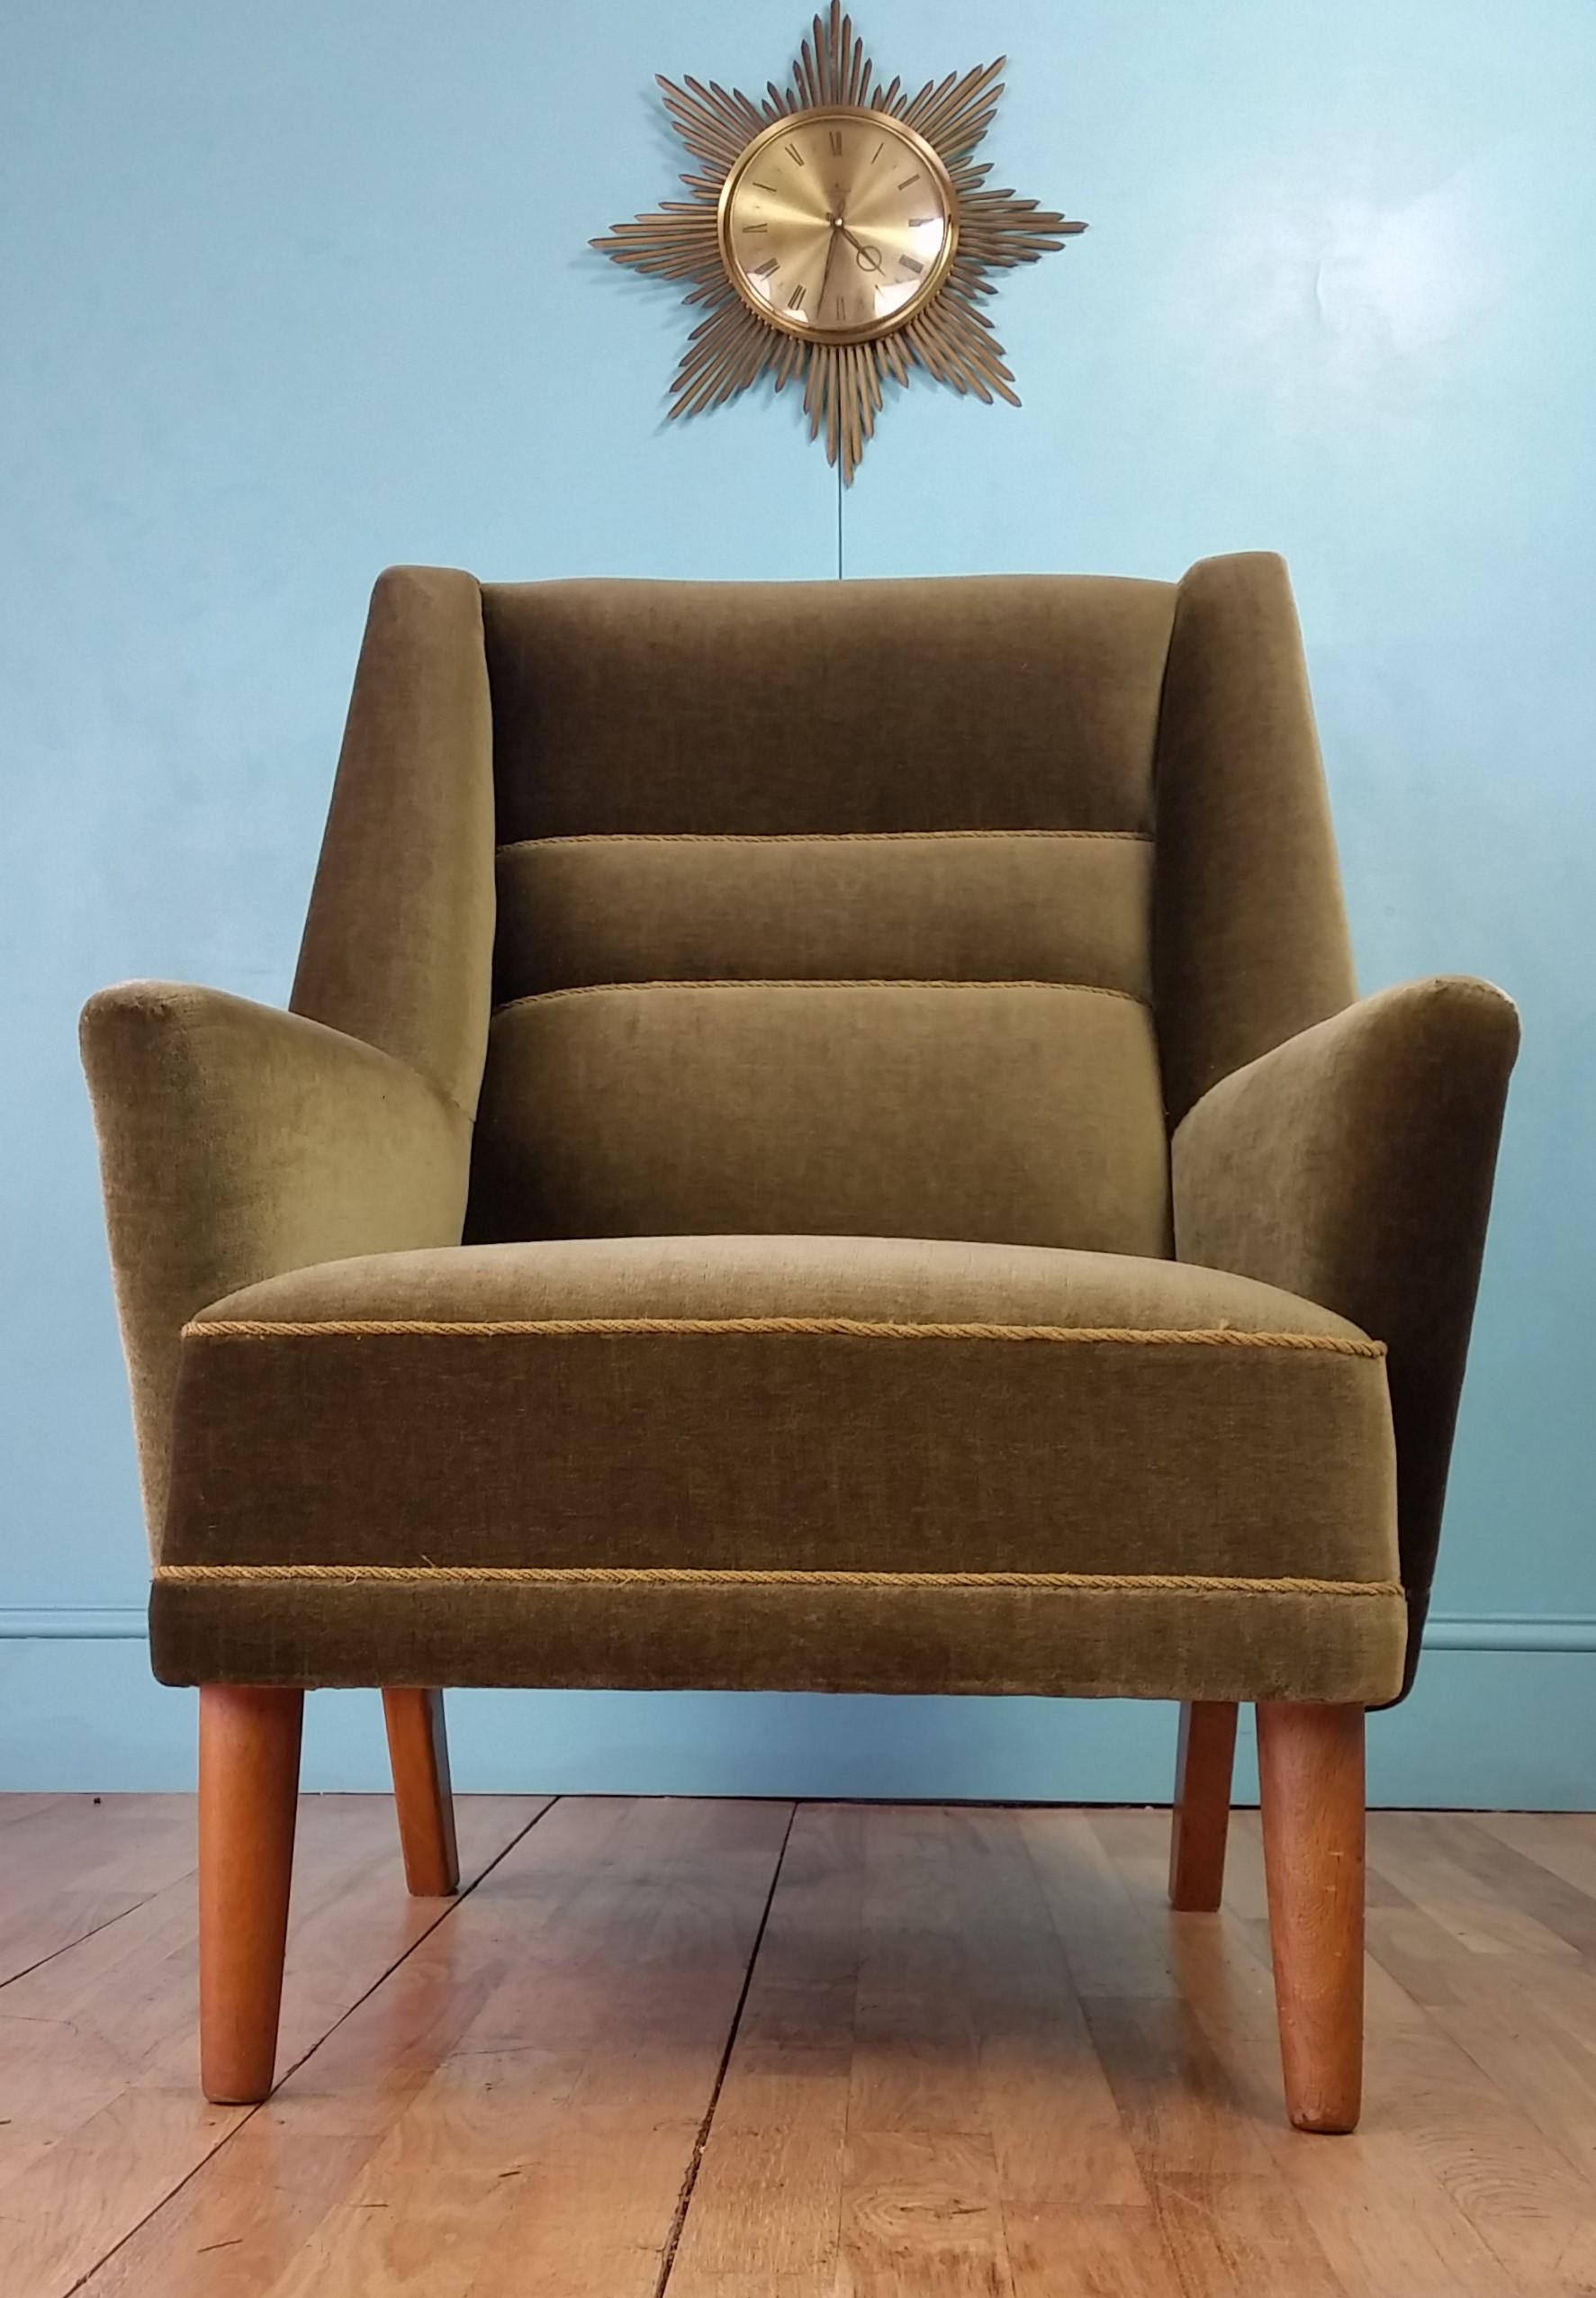 Danish mid century lounge chair circa 1960's.
Olive green velour upholstery with contrasting lighter detailing and teak legs.
Beautifully designed chair with a distinctive angular profile and a classic mid century Scandinavian look.
In excellent